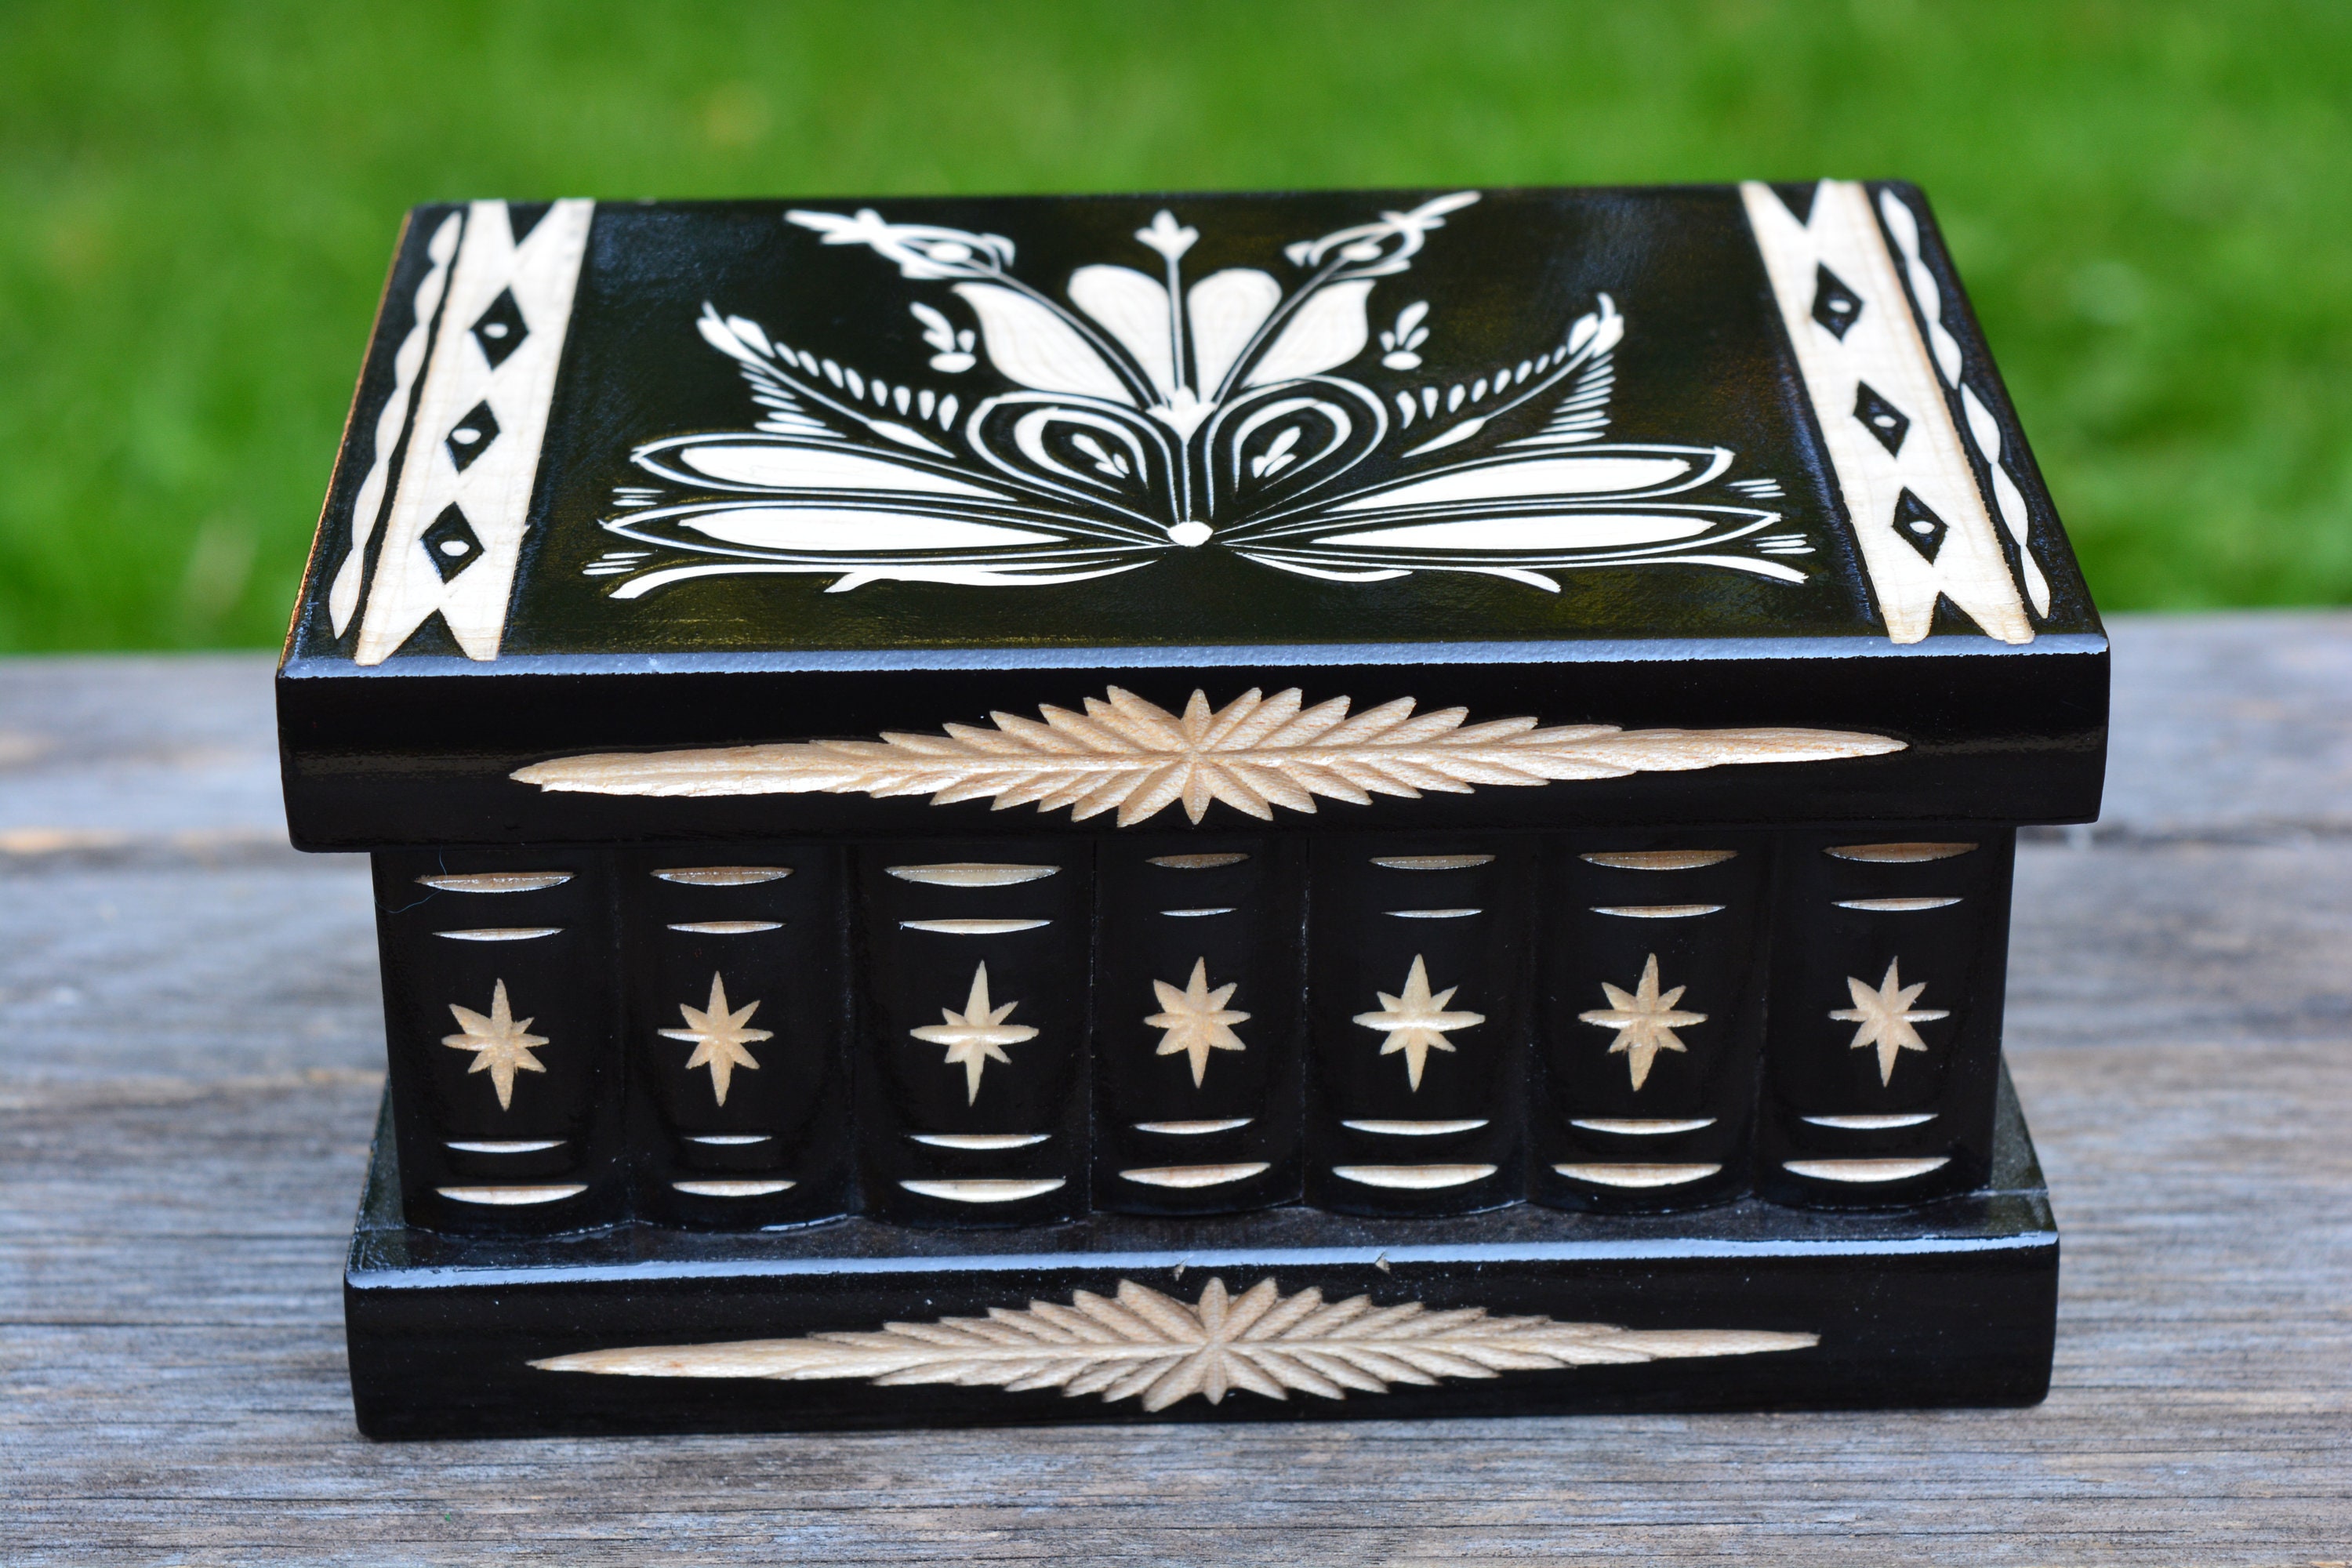 Render Much Aviation Secret Puzzle Box for Adults Black Wooden Box Brain Teaser - Etsy